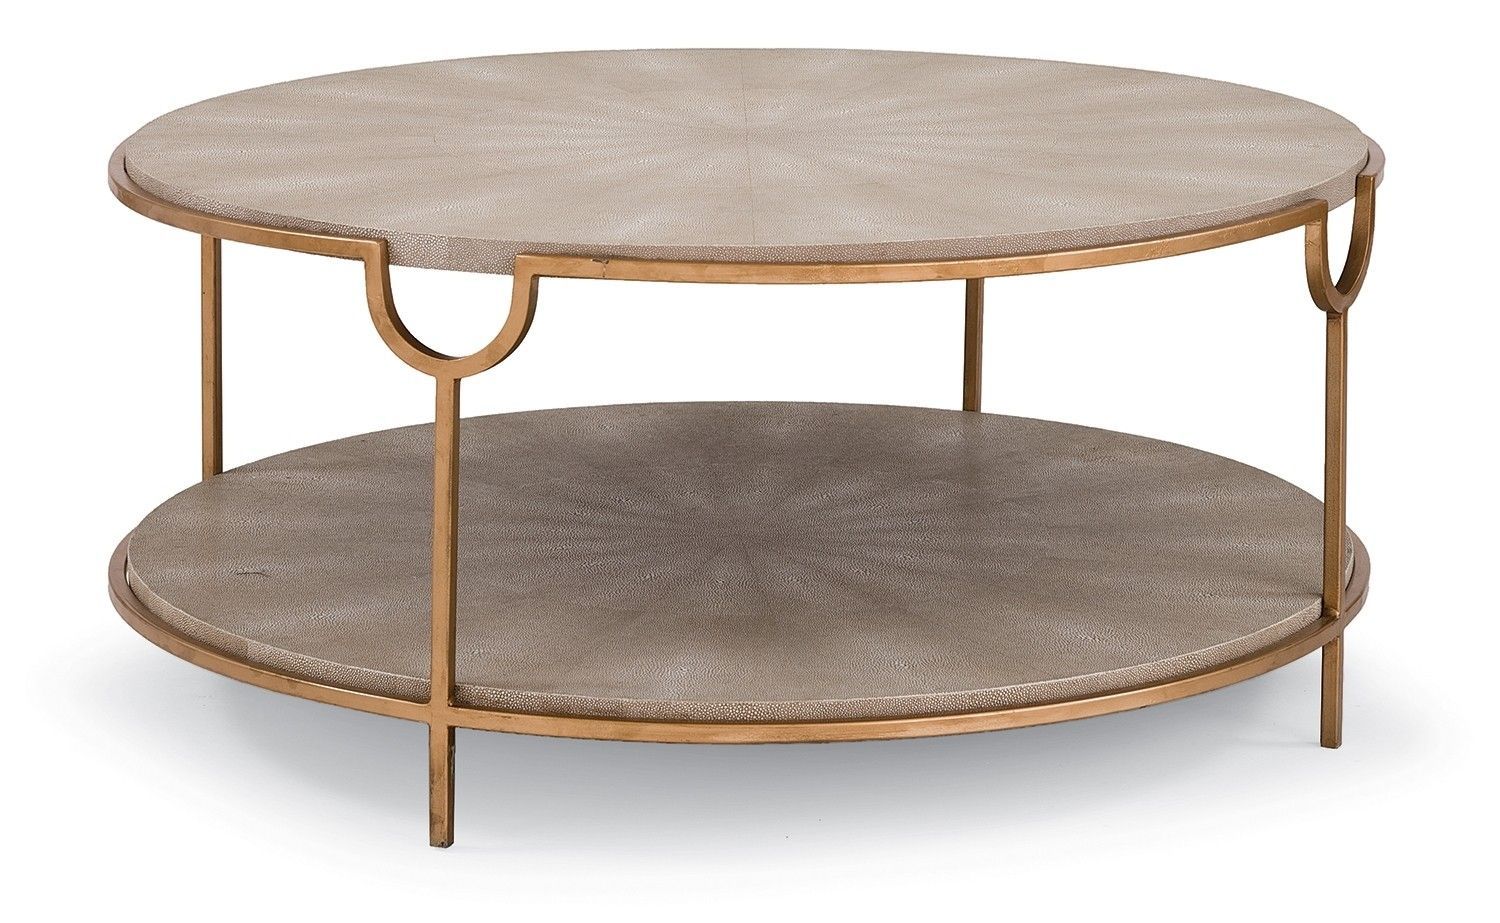 Faux Shagreen Texture Mixed With A Captivating Gold Base Throughout Faux Shagreen Coffee Tables (View 5 of 15)